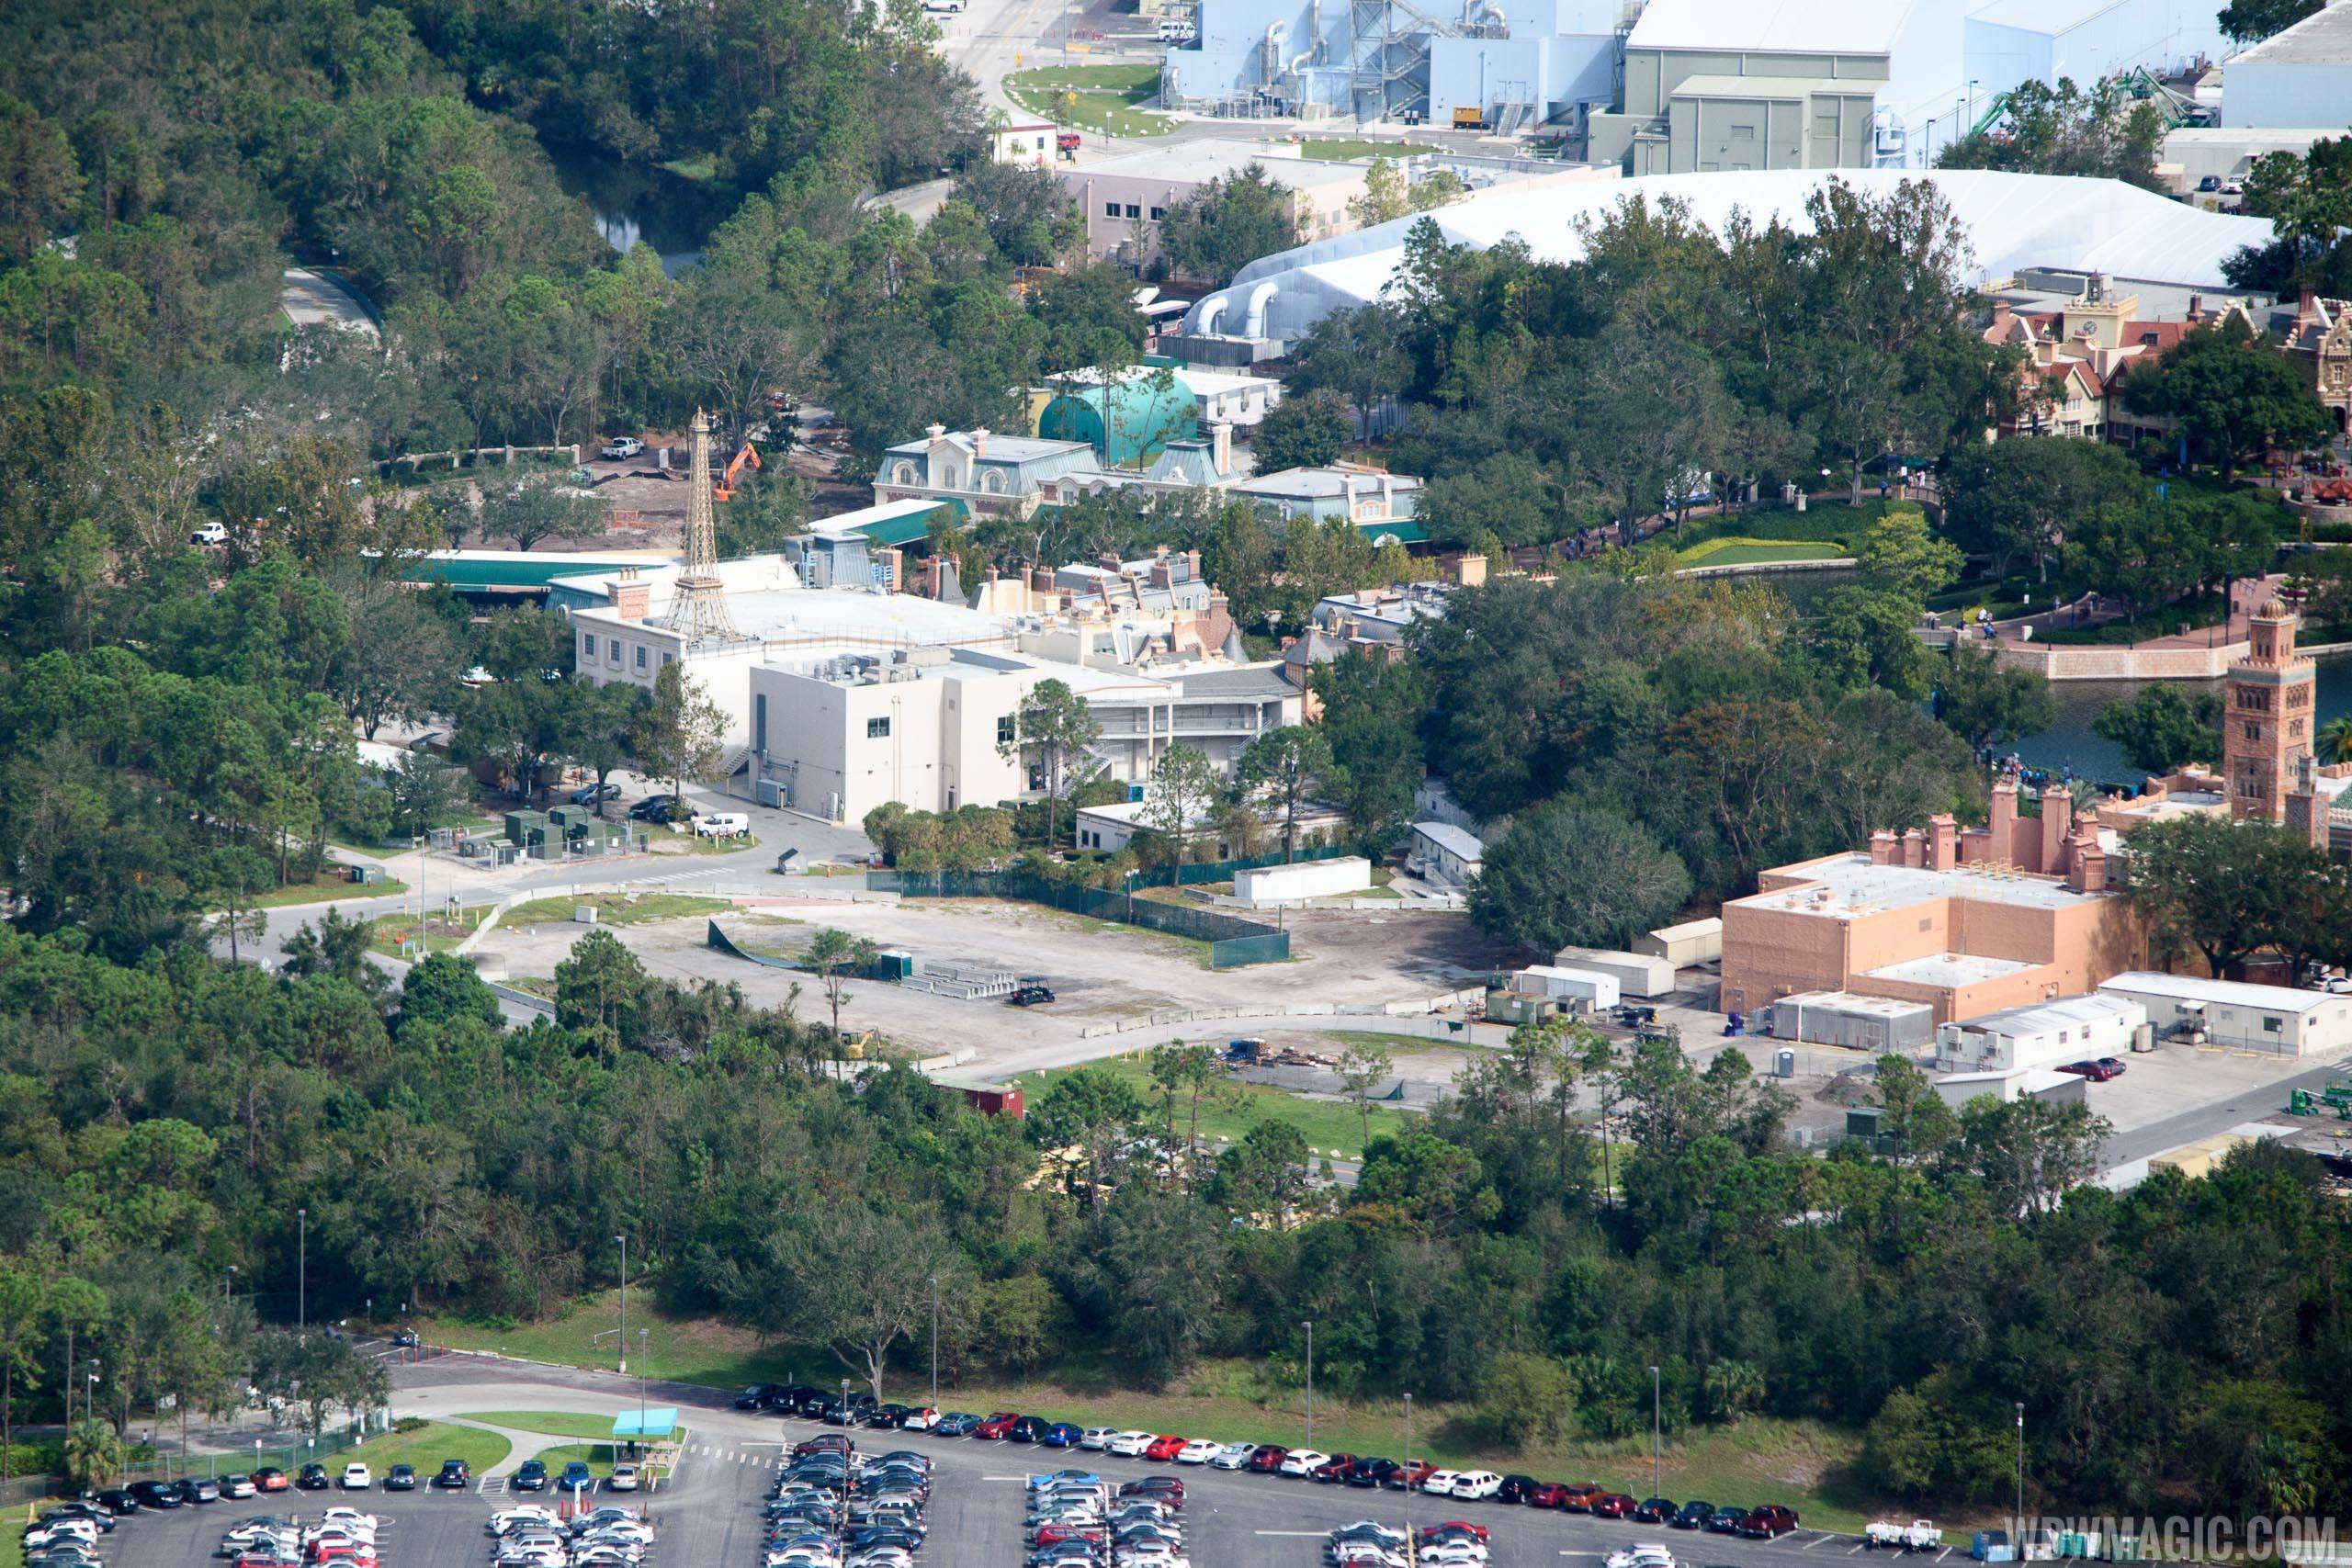 PHOTO - Latest look at the Ratatouille site from the air as first permits are filed for construction